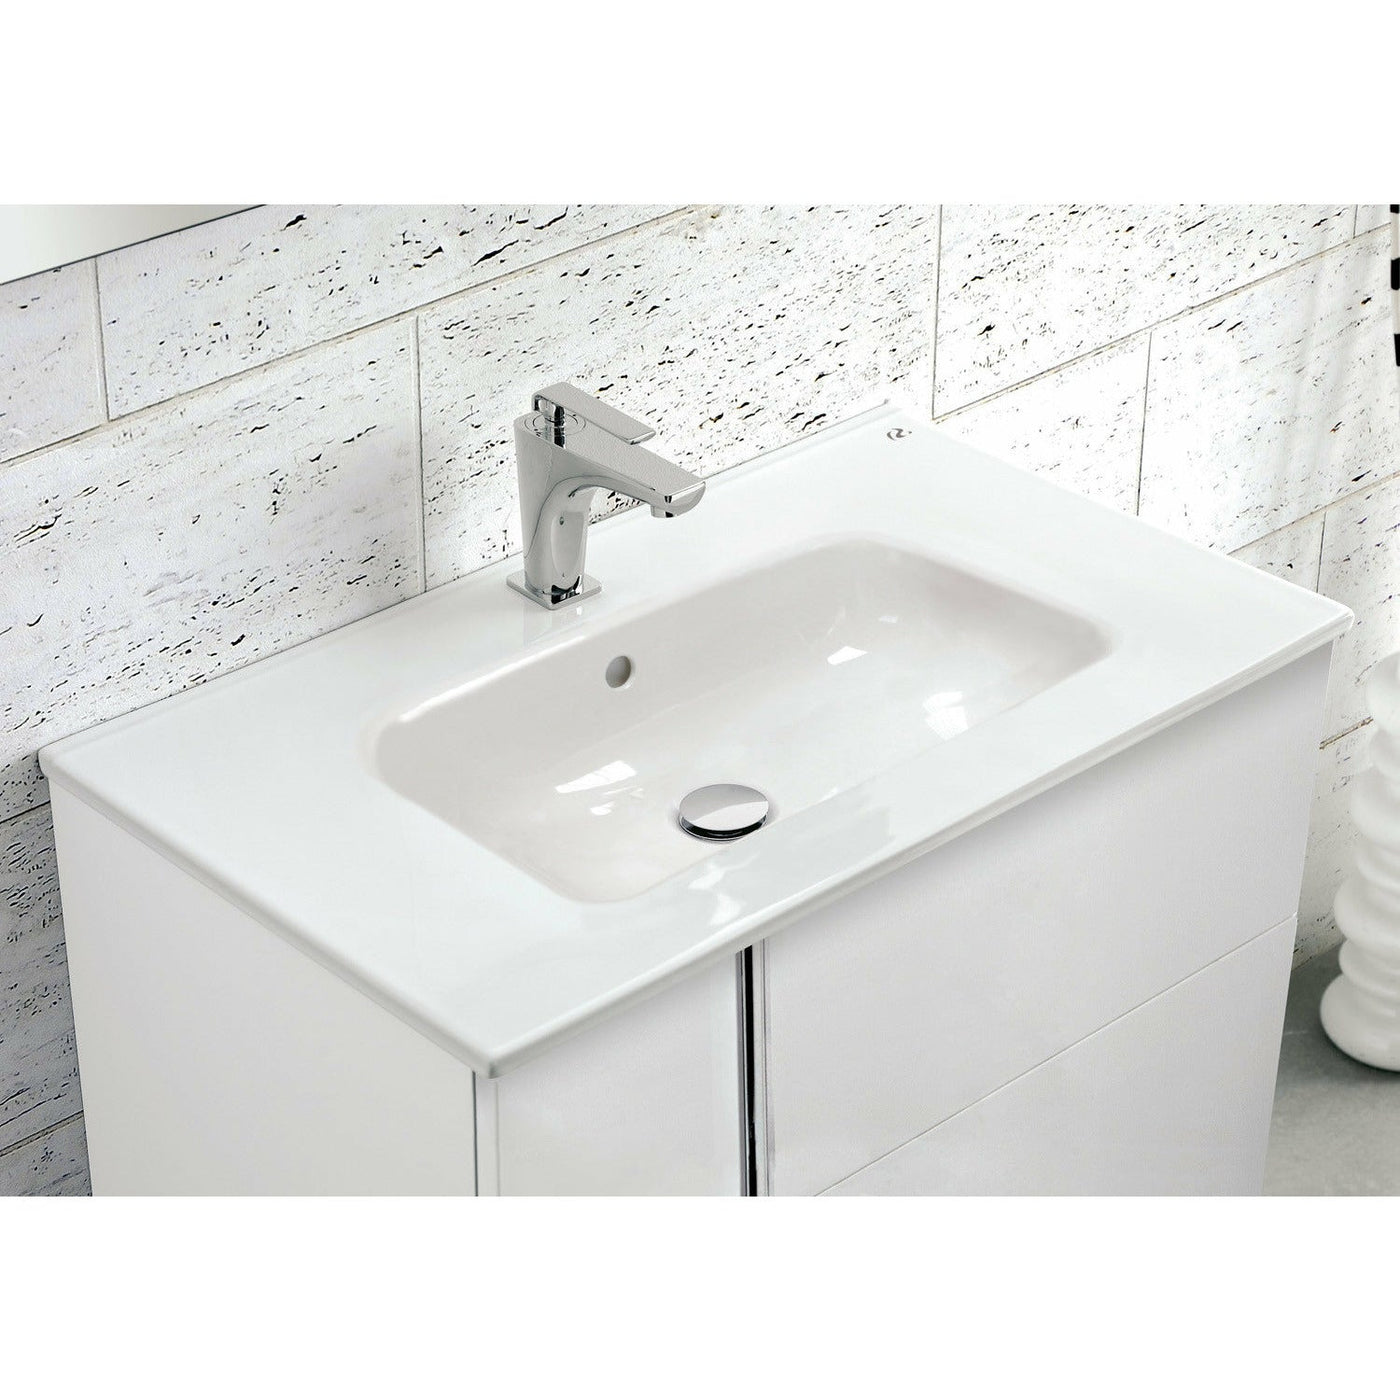 Frontline Glose White Wall-Mounted Onix 2 Door Vanity Unit with Chrome Handle 600mm - Letta London - Wall Hung Vanity Units